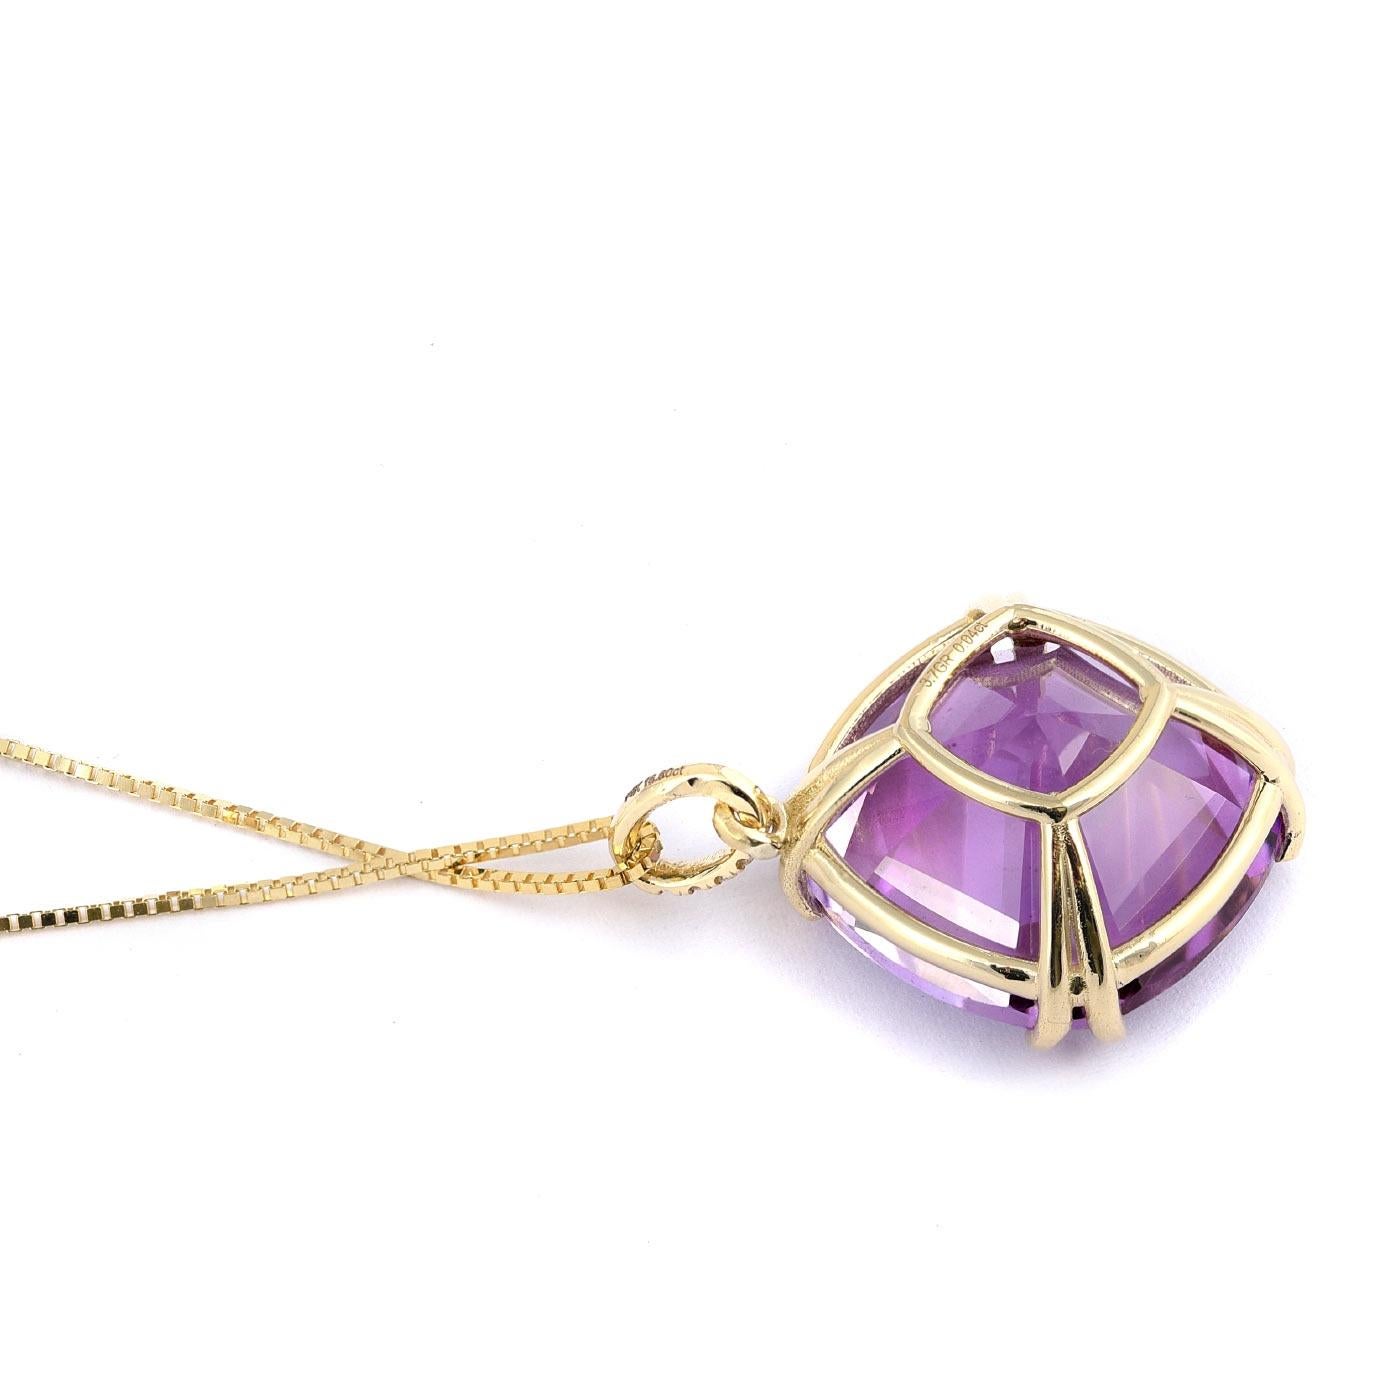 Mixed Cut 17.96 Carats Amethyst Diamonds set in 14K Yellow Gold Pendant and 18